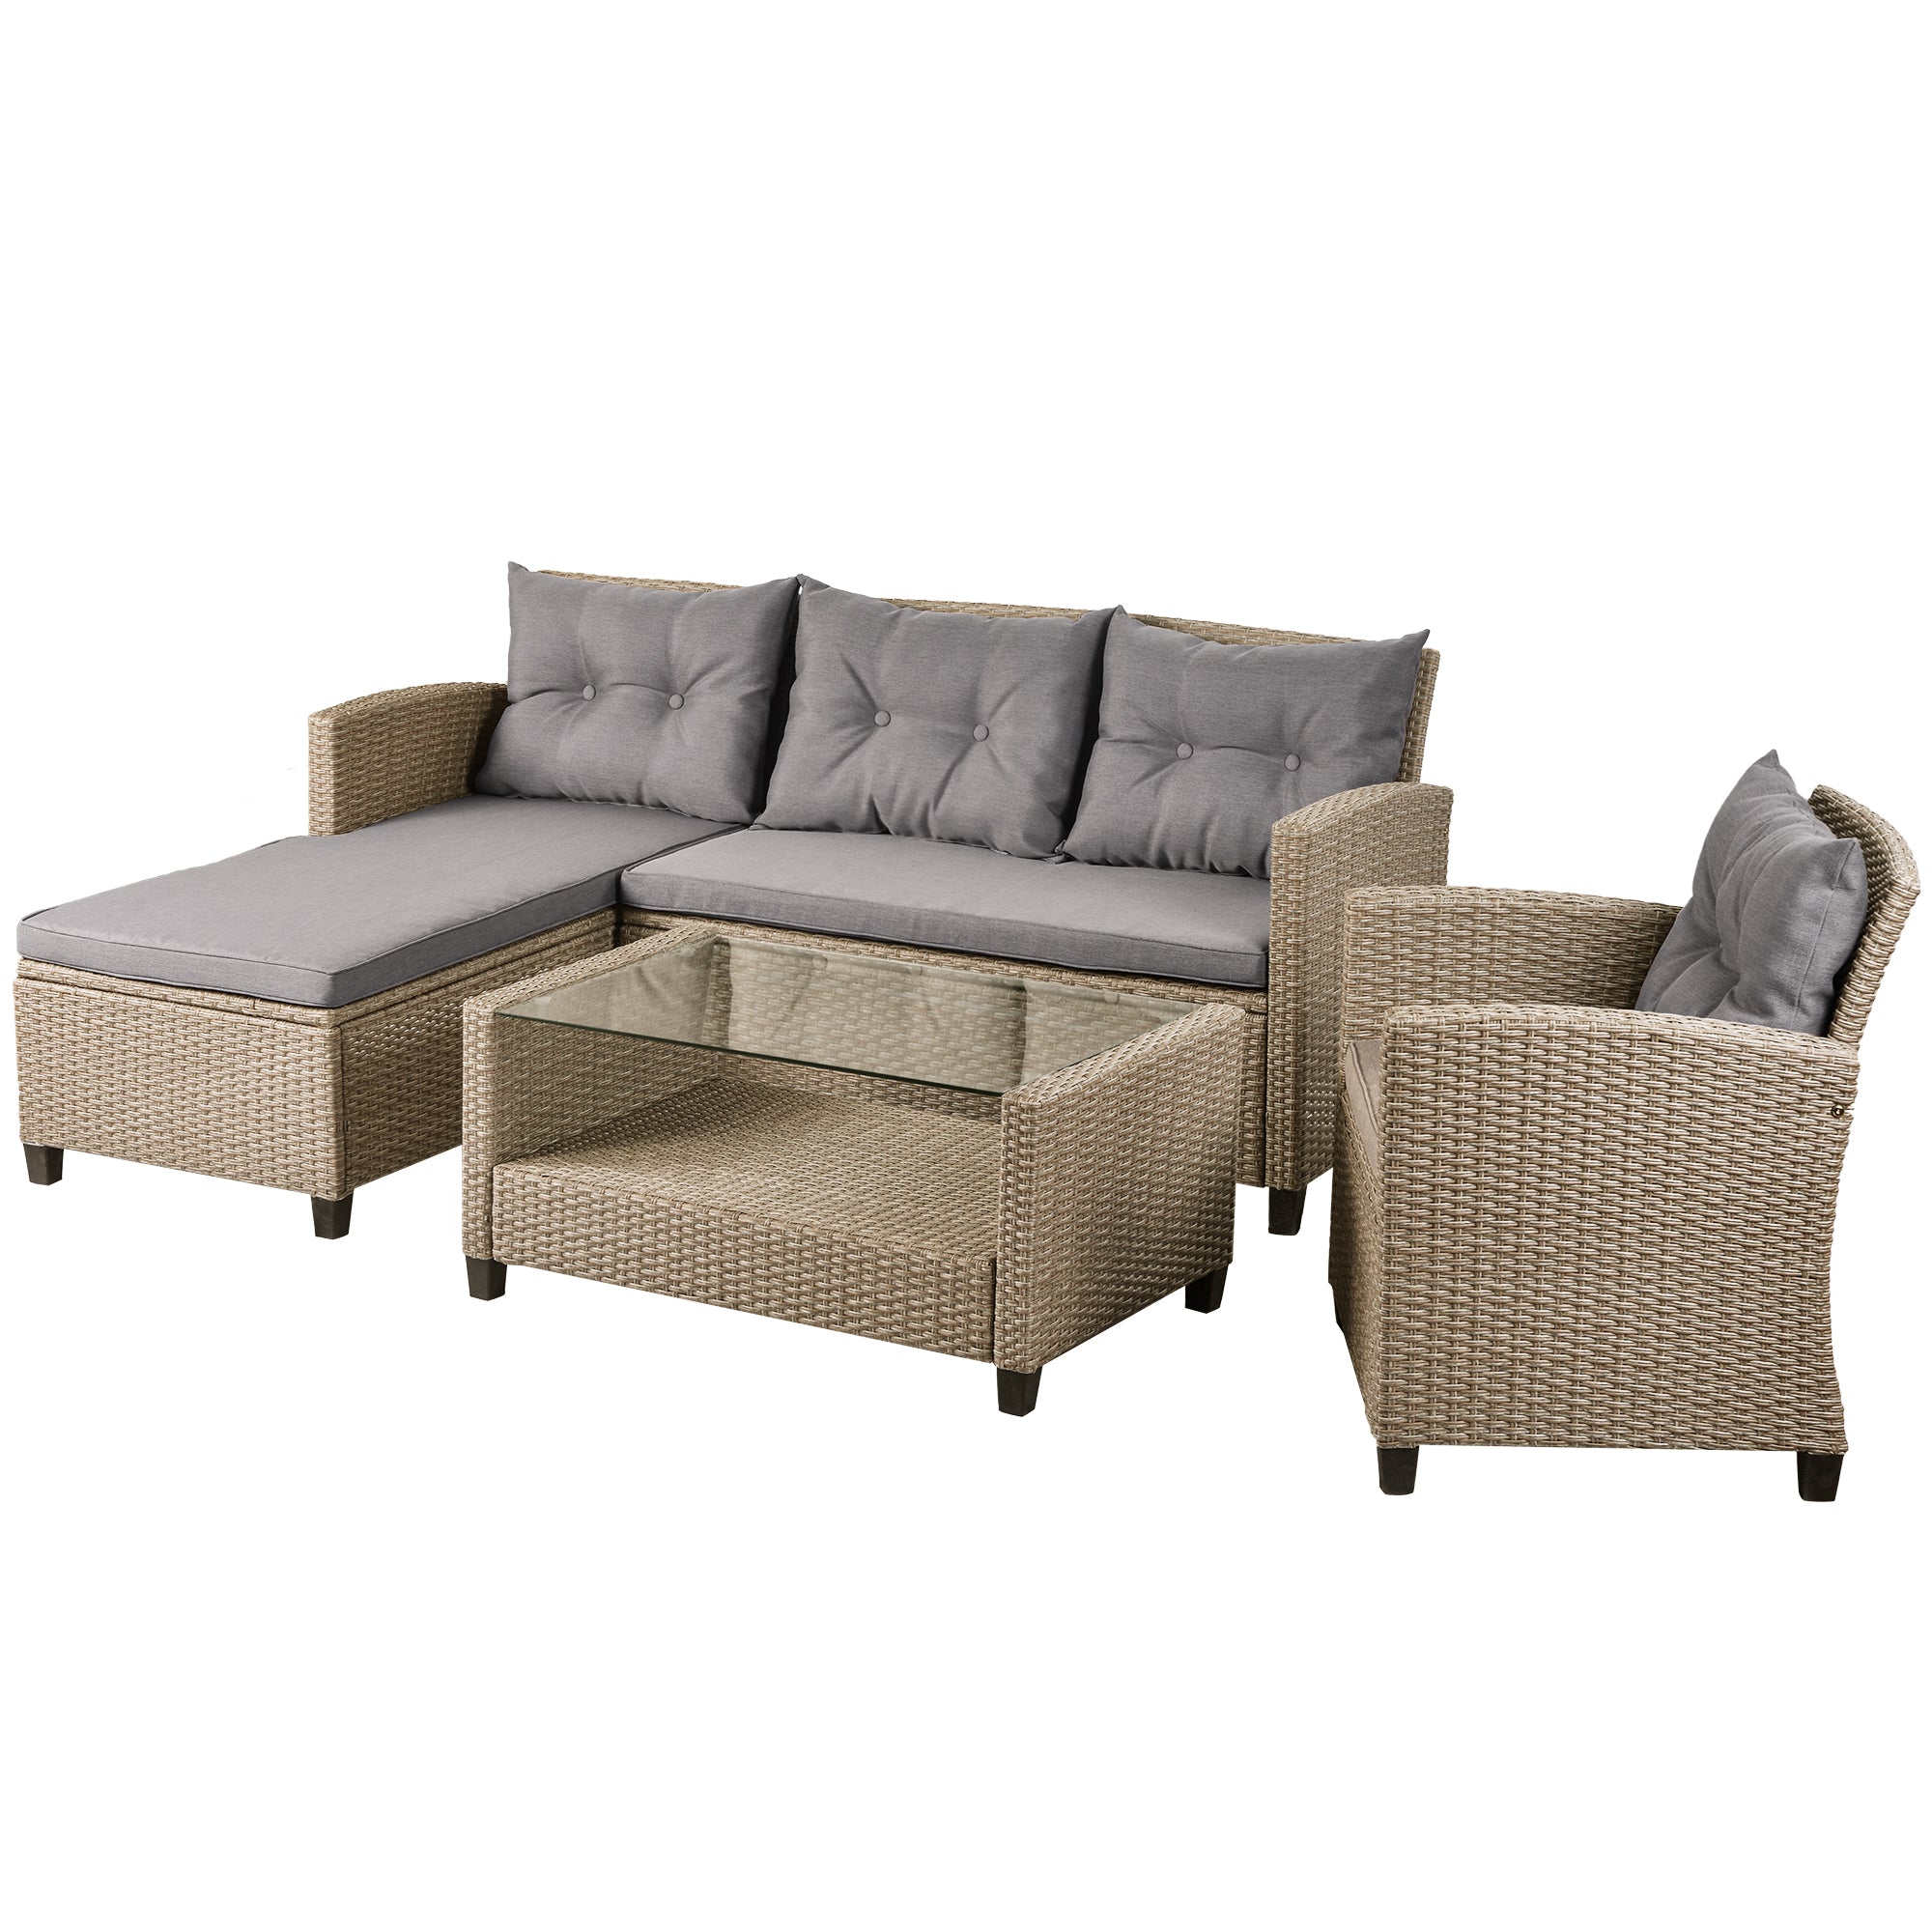 Brown 4-Piece Wicker Patio Sectional Set | Relax in Style